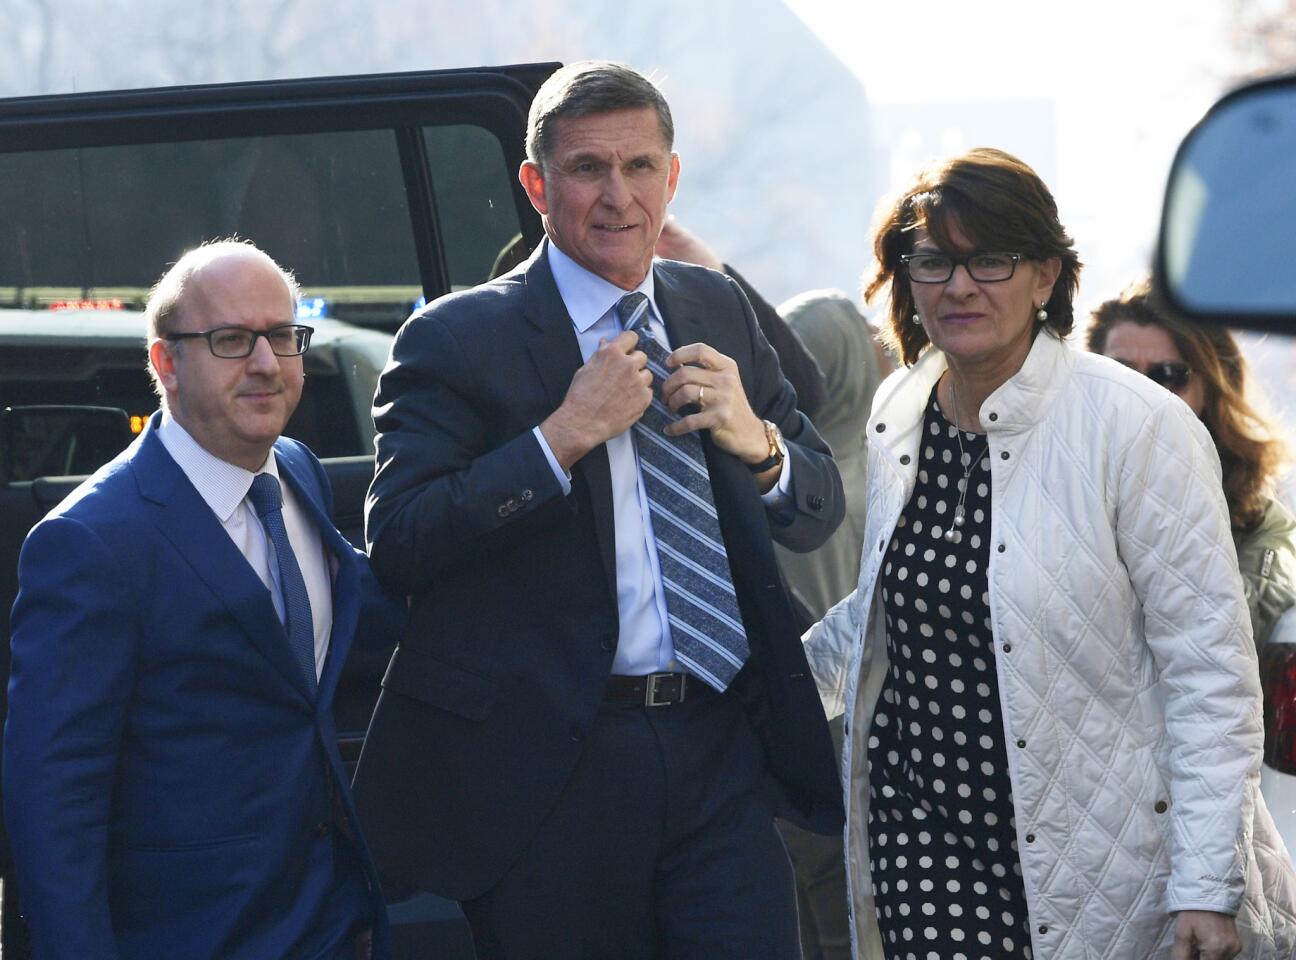 Former national security adviser Michael Flynn, center, arrives at federal court in Washington, D.C., on Dec. 1, 2017. Court documents show Flynn, an early and vocal supporter of Donald Trump's on his campaign trail whose business dealings and foreign interactions made him a central focus of Robert Mueller's investigation, was expected to admit to lying about his conversations with Russia's ambassador to the United States during the transition period before President Trump's inauguration.